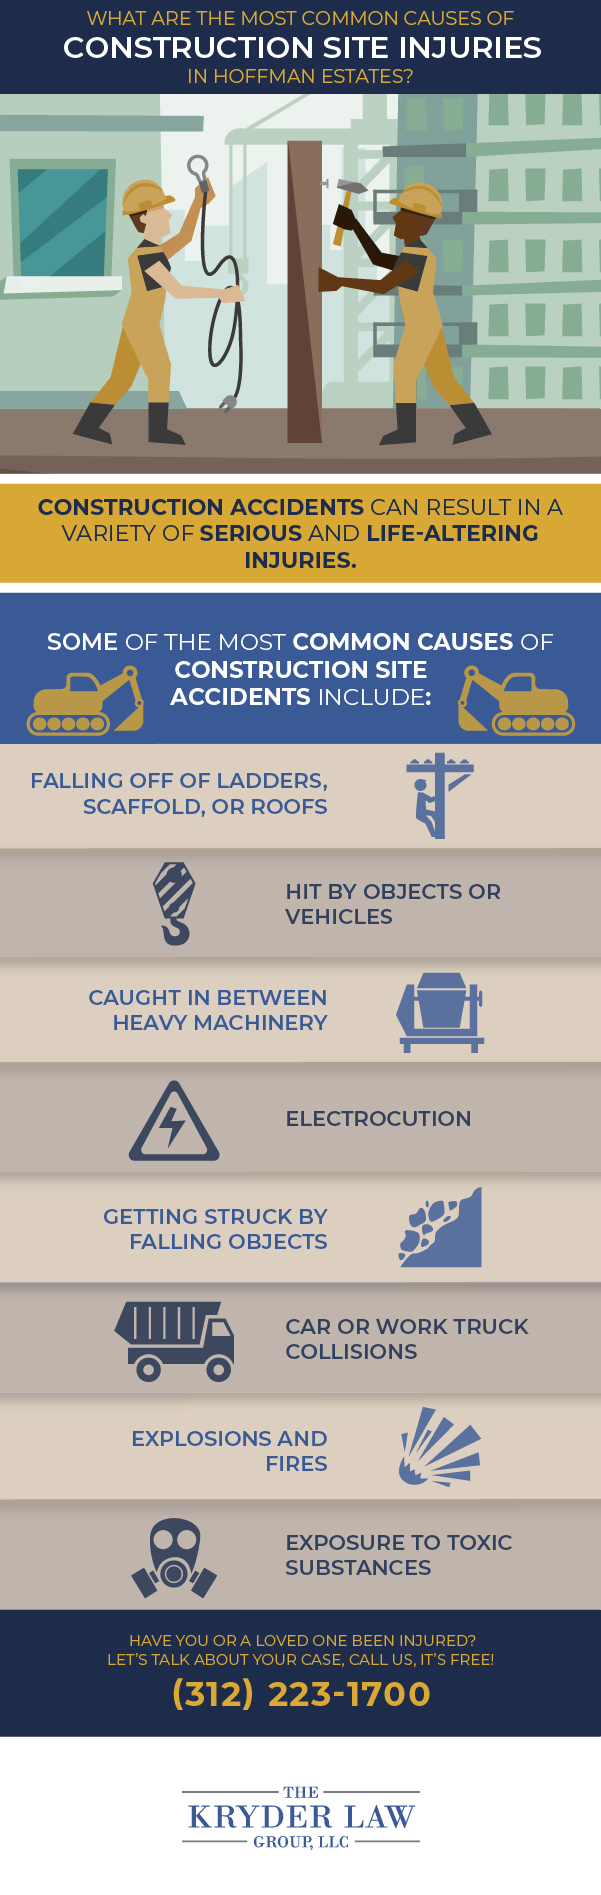 Common Causes of Construction Site Injuries in Hoffman Estates Infographic